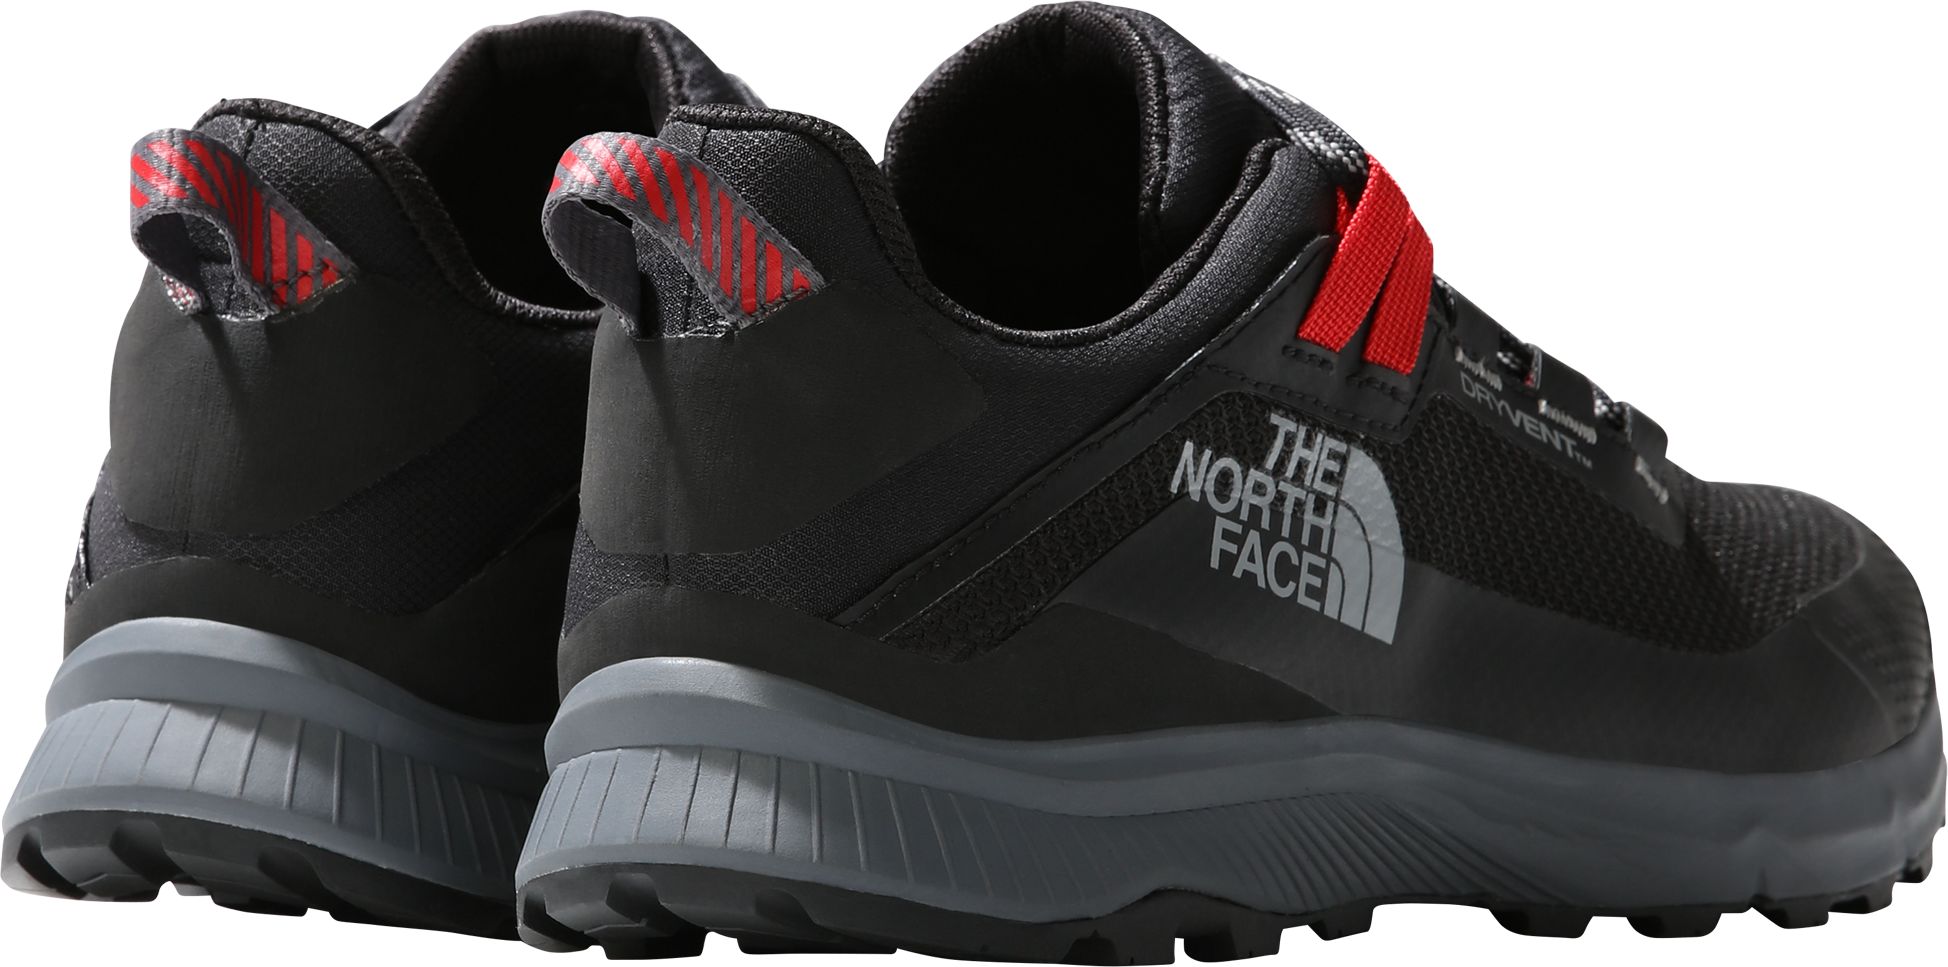 THE NORTH FACE, M CRAGSTONE WP